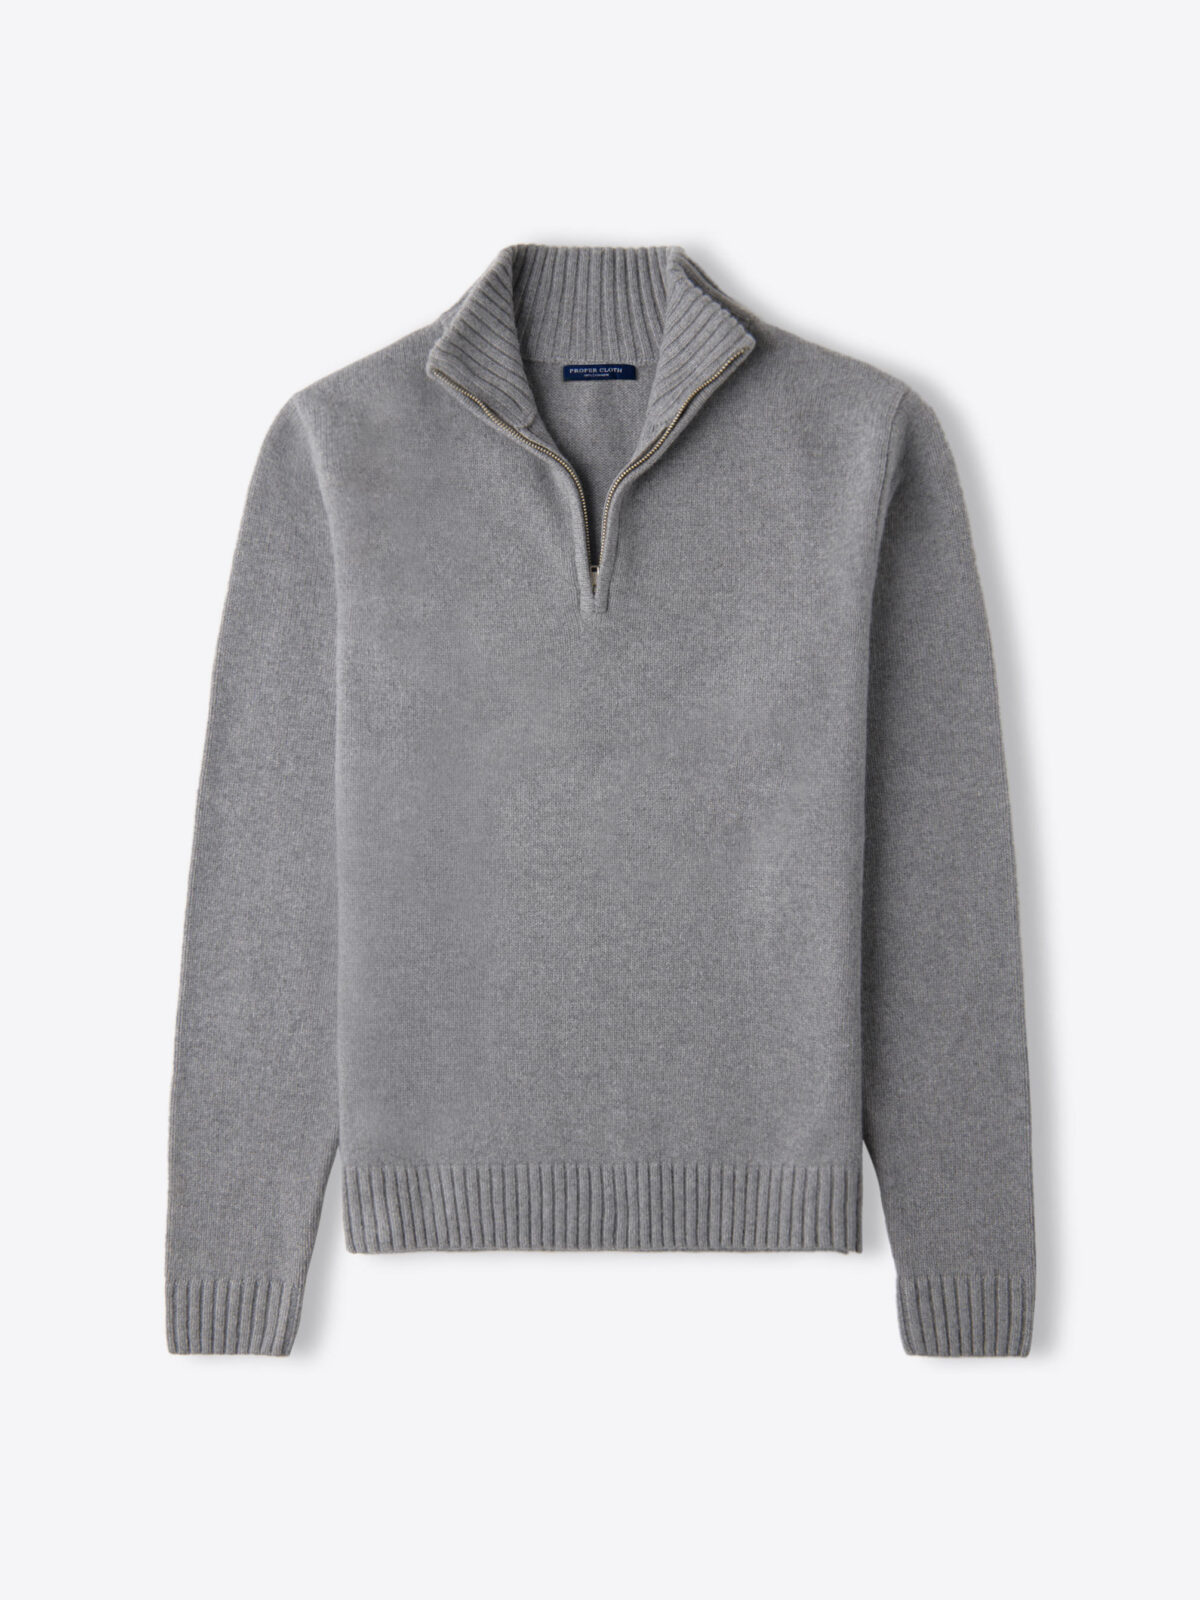 Grey Wool and Cashmere Half-Zip Sweater